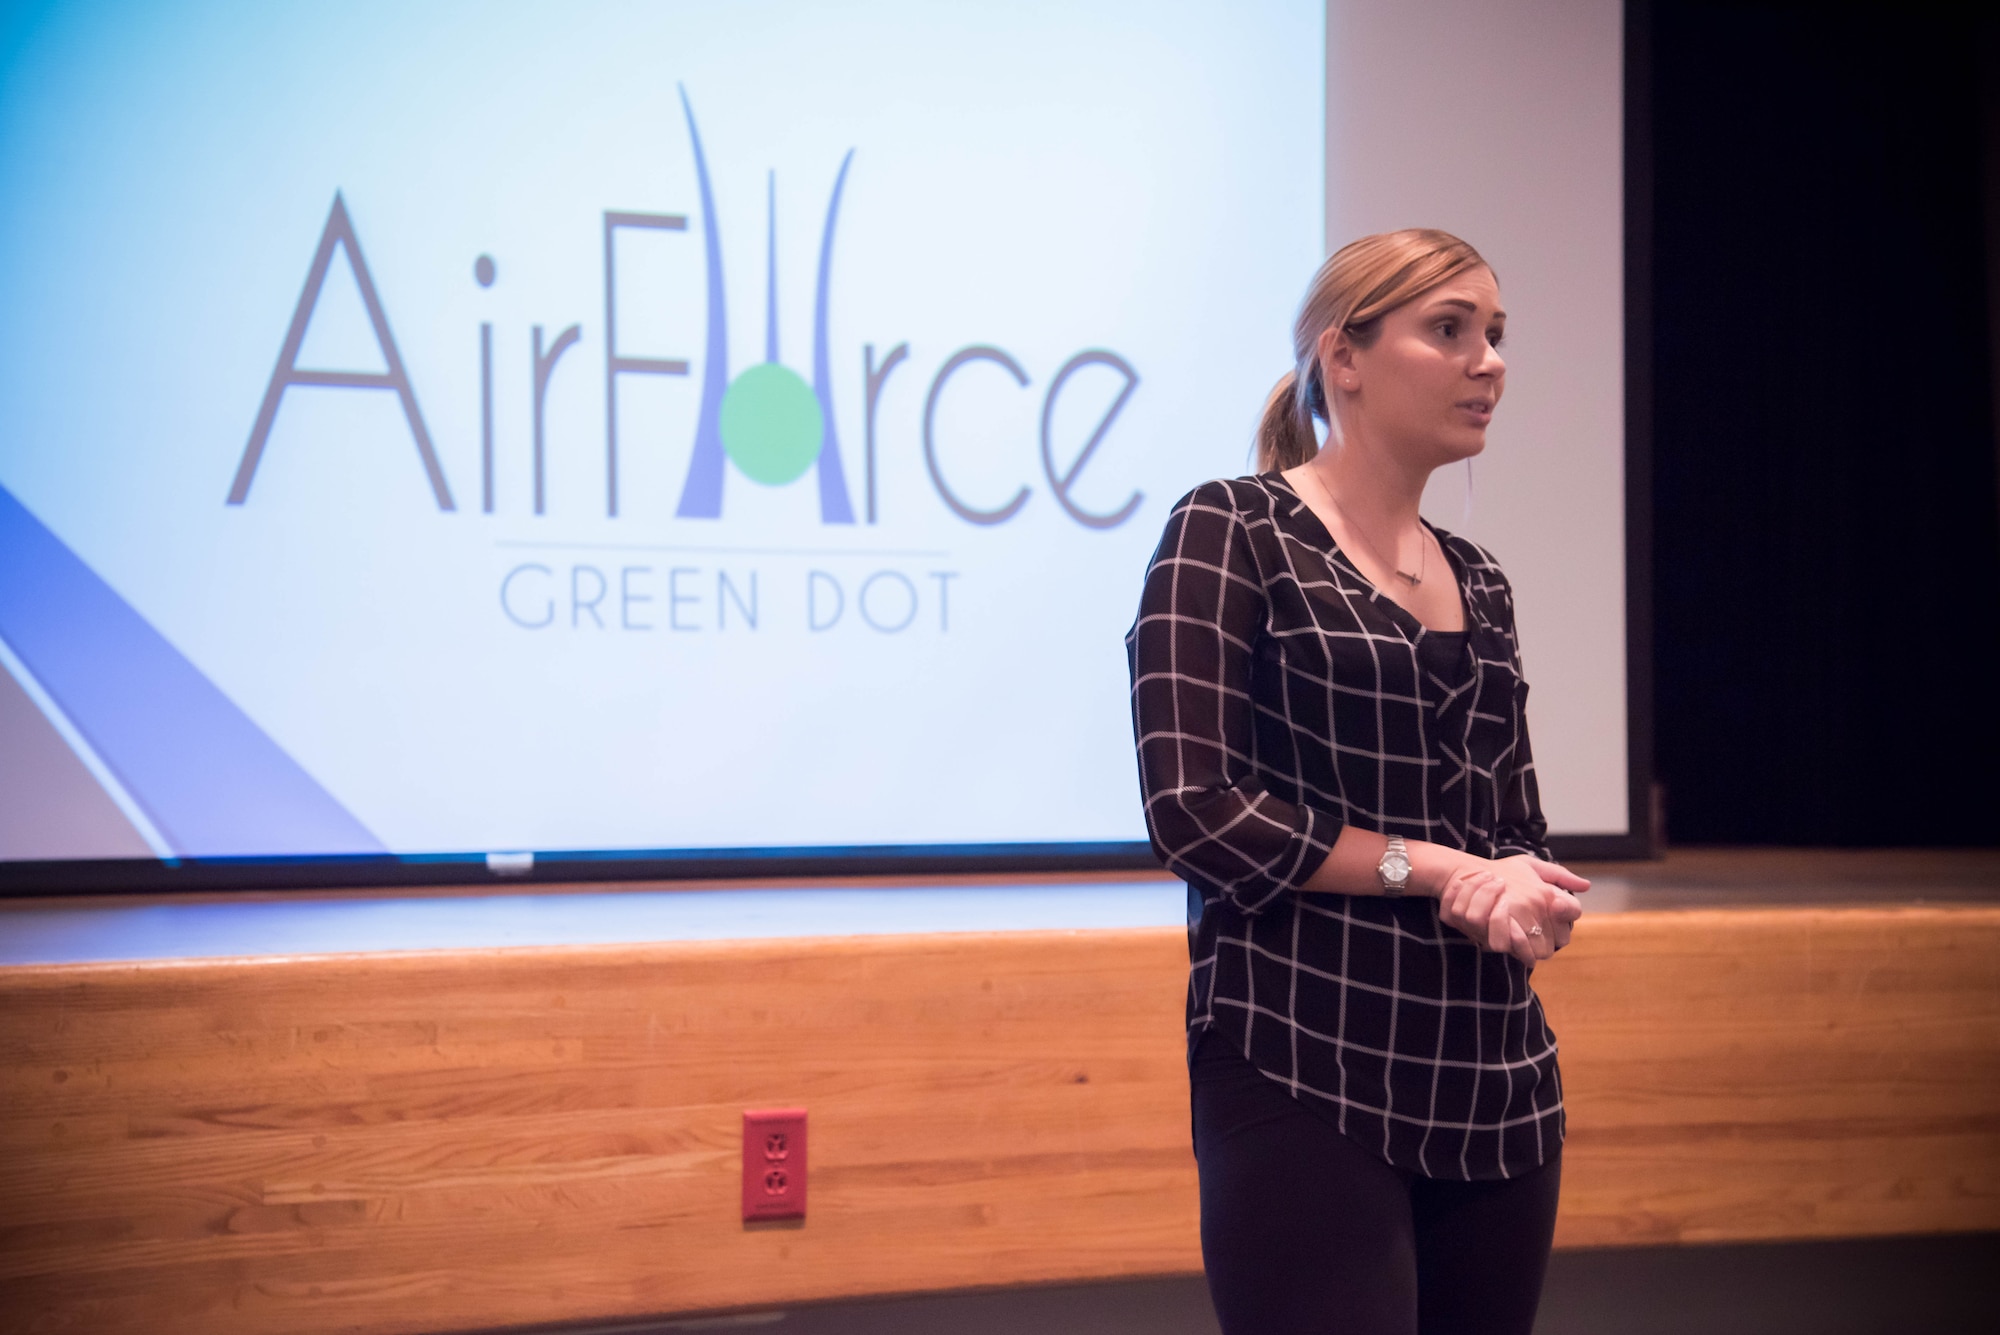 Staff Sgt. Kayla Kappel, 403rd Financial Management Office technician teaches 403rd Wing members about Green Dot during a training class at Keesler Air Force Base, Miss. Nov. 5. Green Dot is the U.S. Air Force's program to help raise awareness of and prevent sexual assault, domestic violence and stalking. (U.S. Air Force photo/Staff Sgt. Heather Heiney)